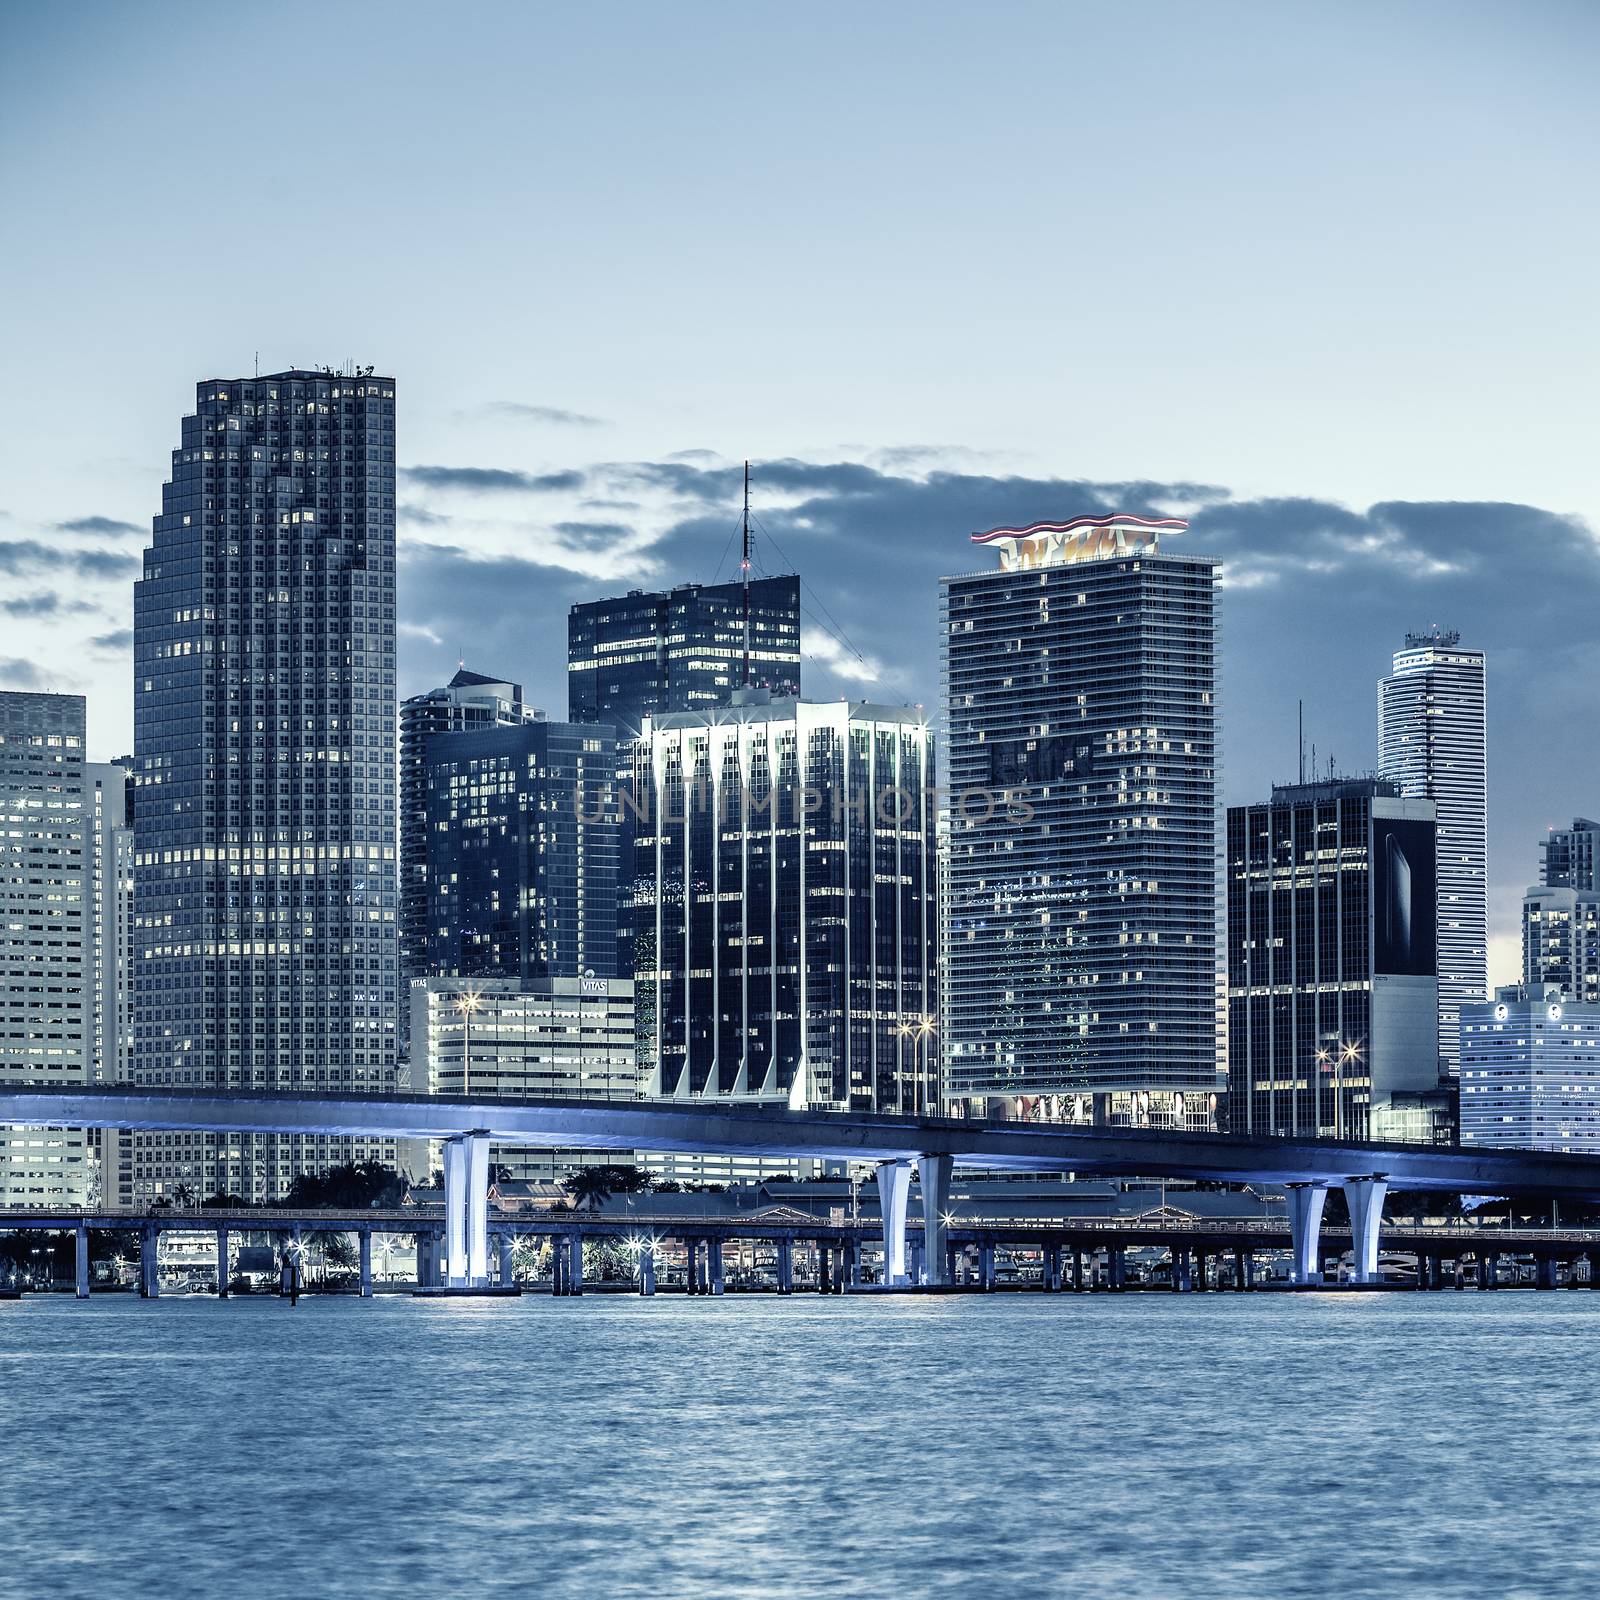 CIty of Miami Florida, business and residential buildings and bridge on Biscayne Bay